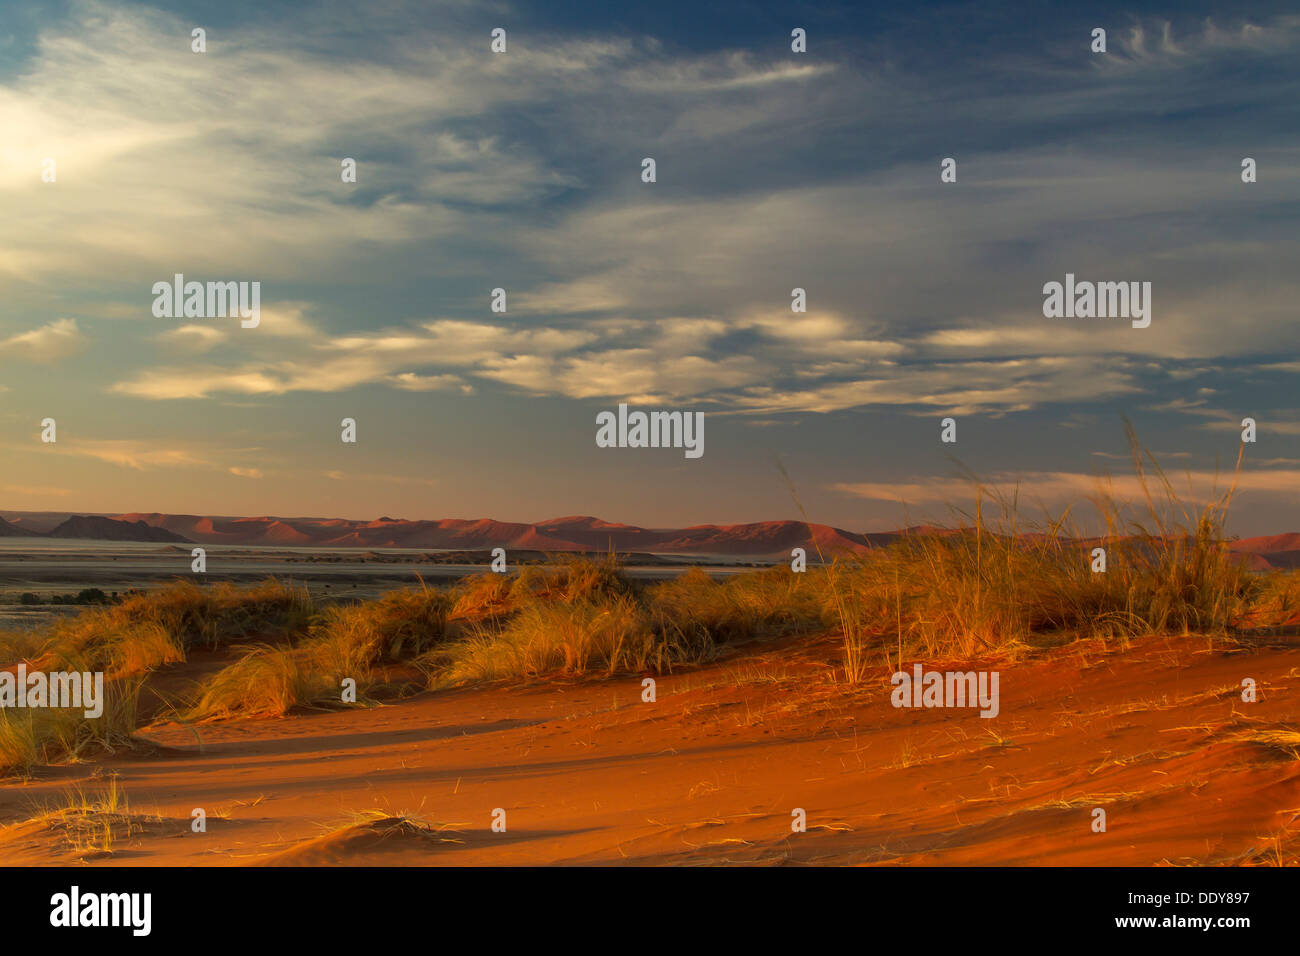 Landscape with sand dunes in the morning Stock Photo